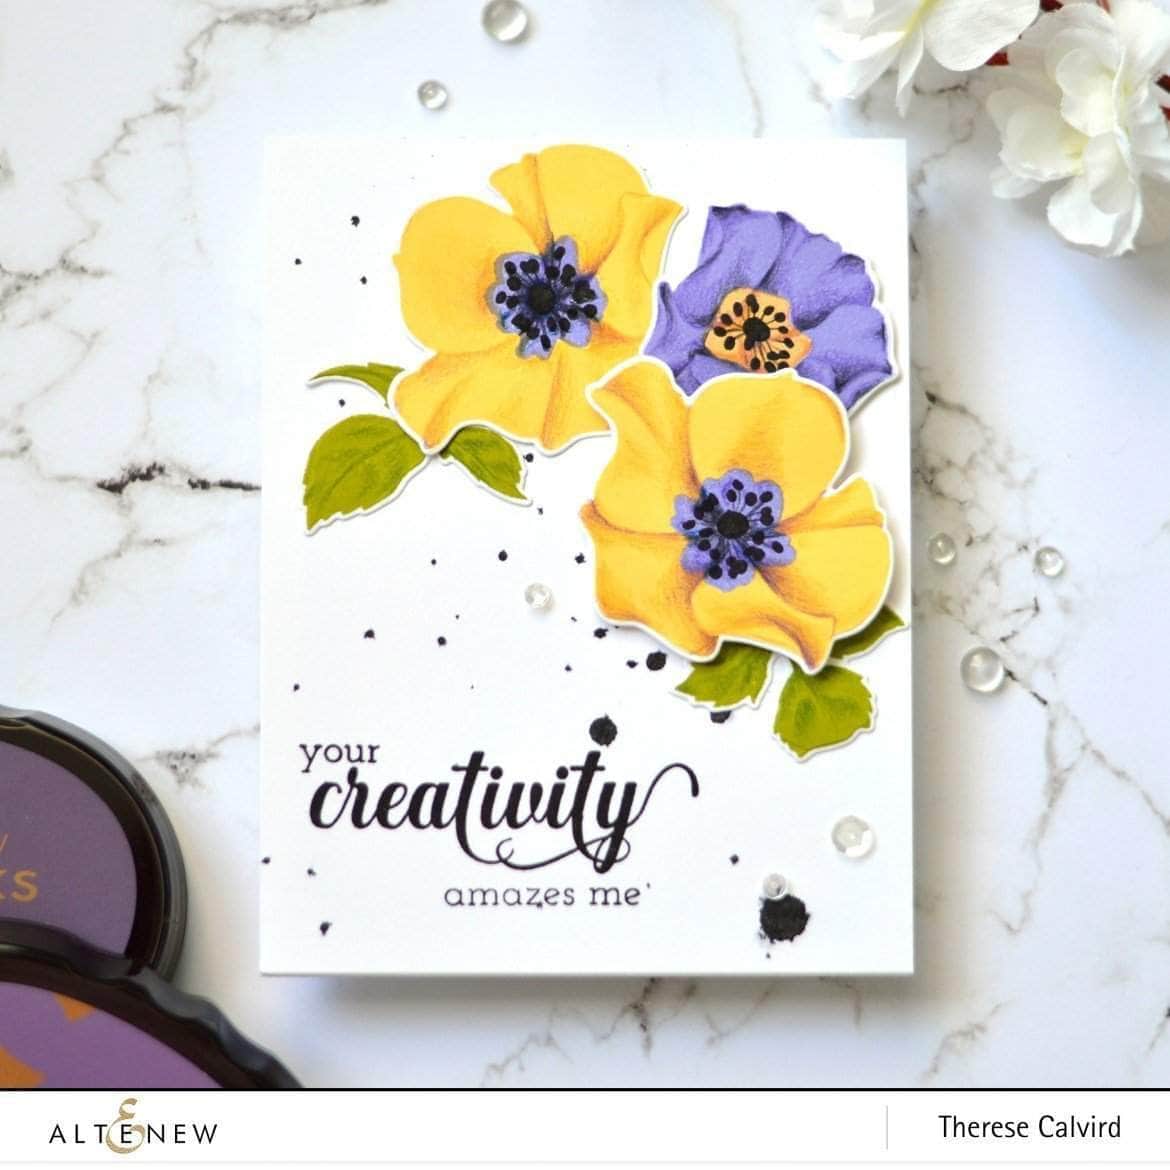 Clear Stamps Fancy Greetings Stamp Set